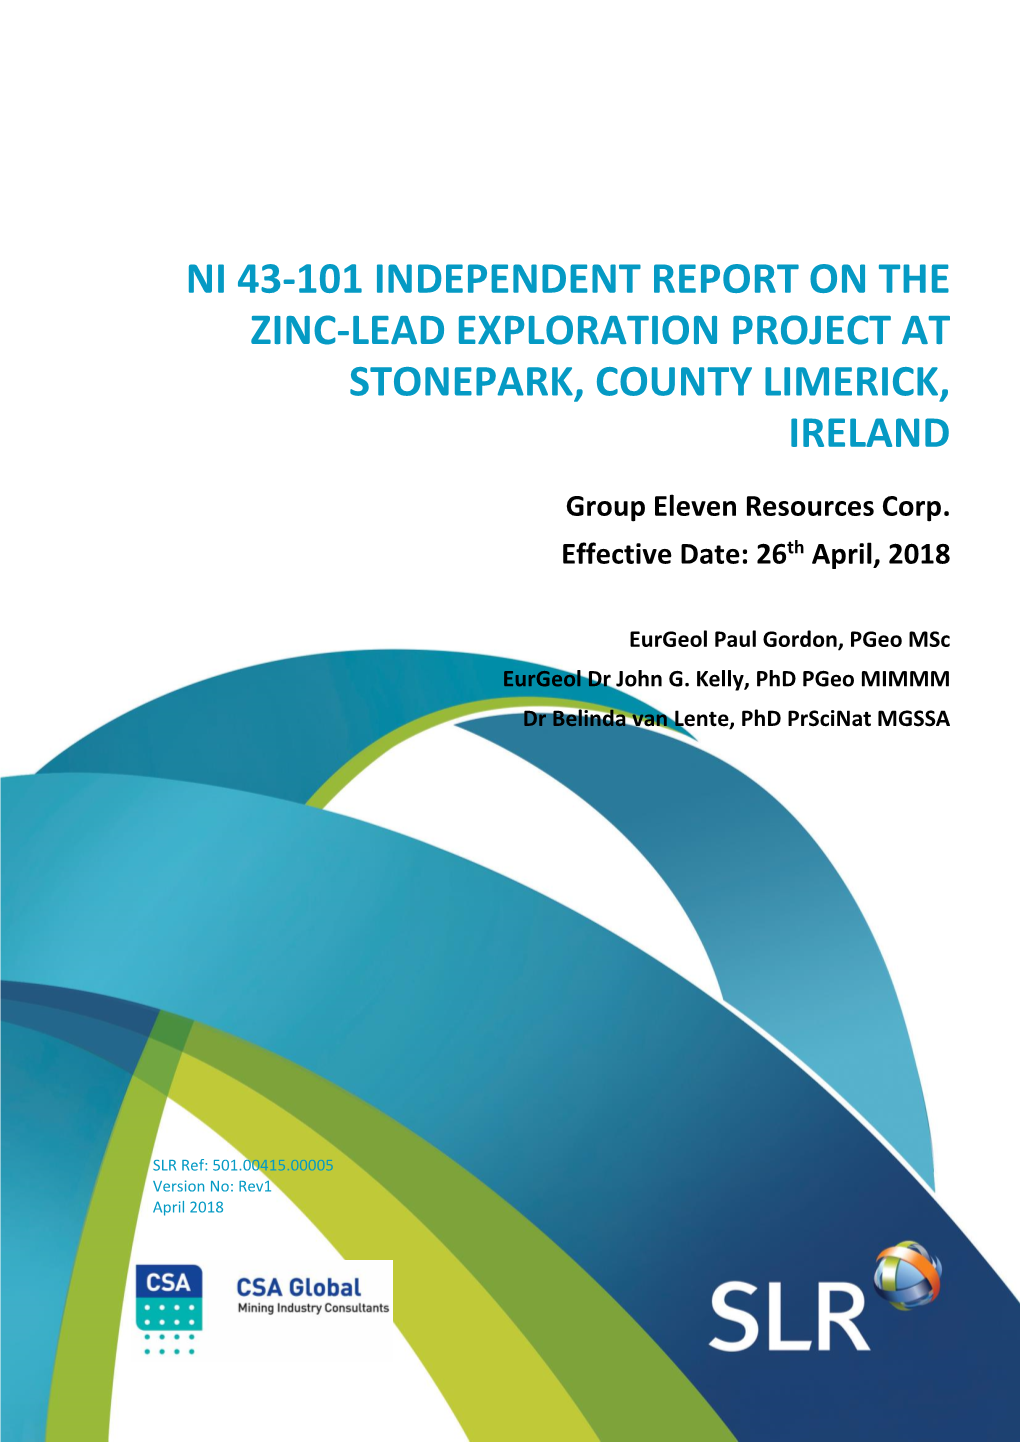 Ni 43-101 Independent Report on the Zinc-Lead Exploration Project at Stonepark, County Limerick, Ireland